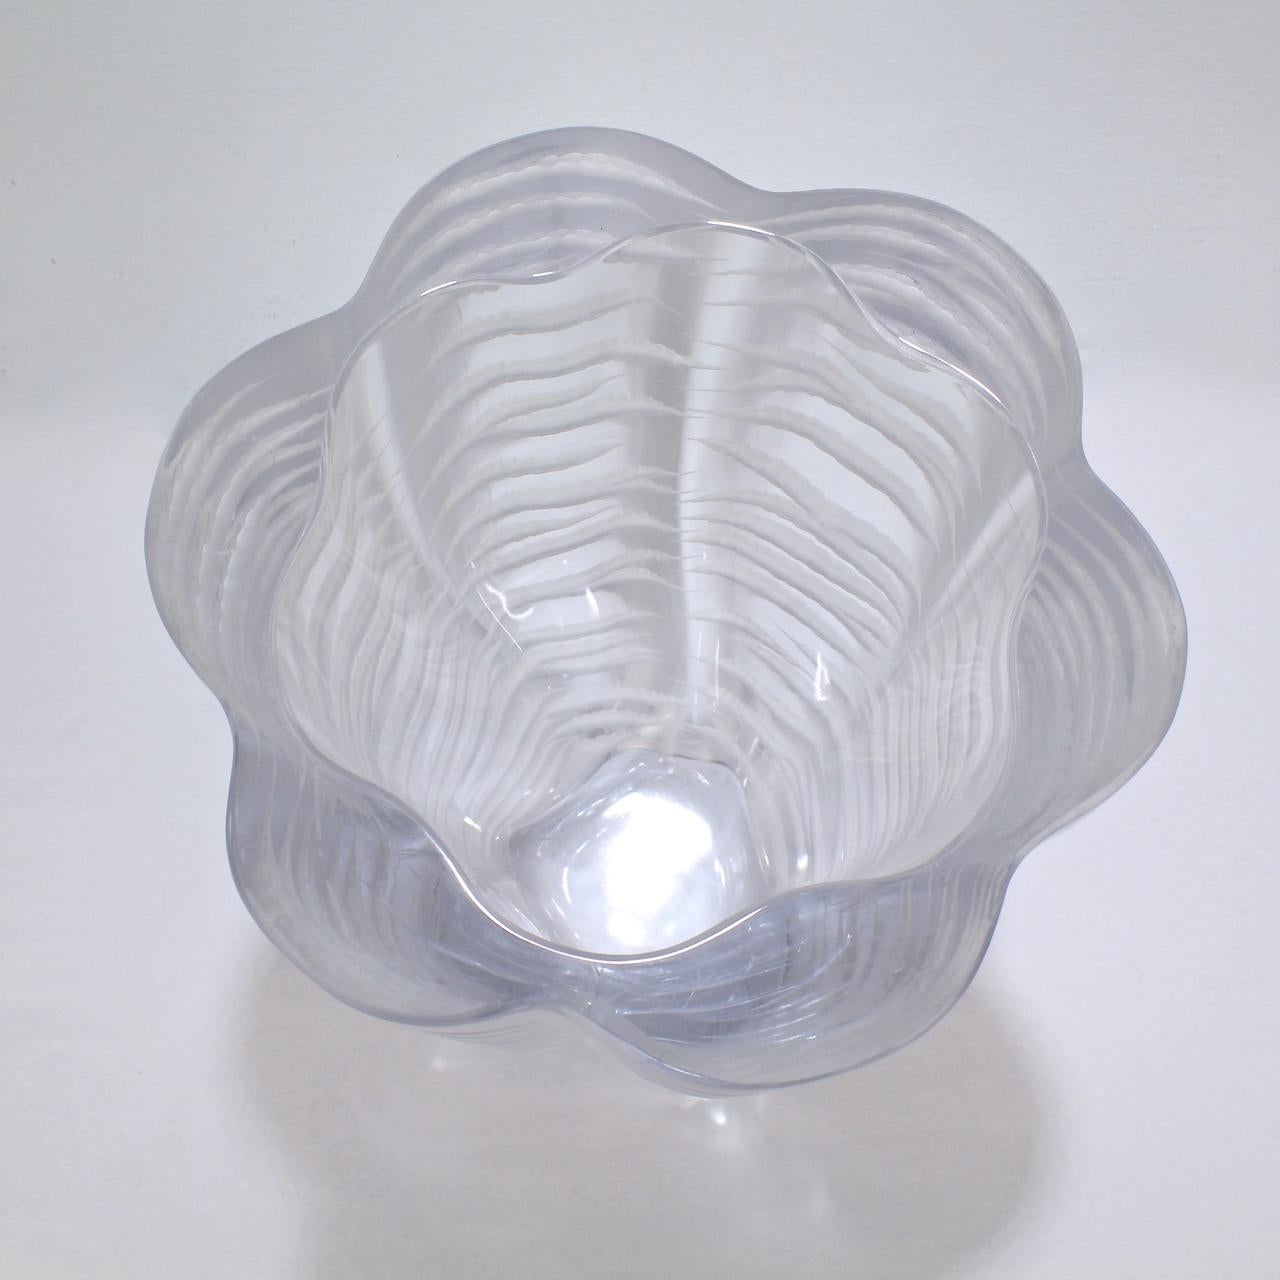 Senlis, a Mid-Century Modern French Art Glass Vase by Marc Lalique for Lalique 2